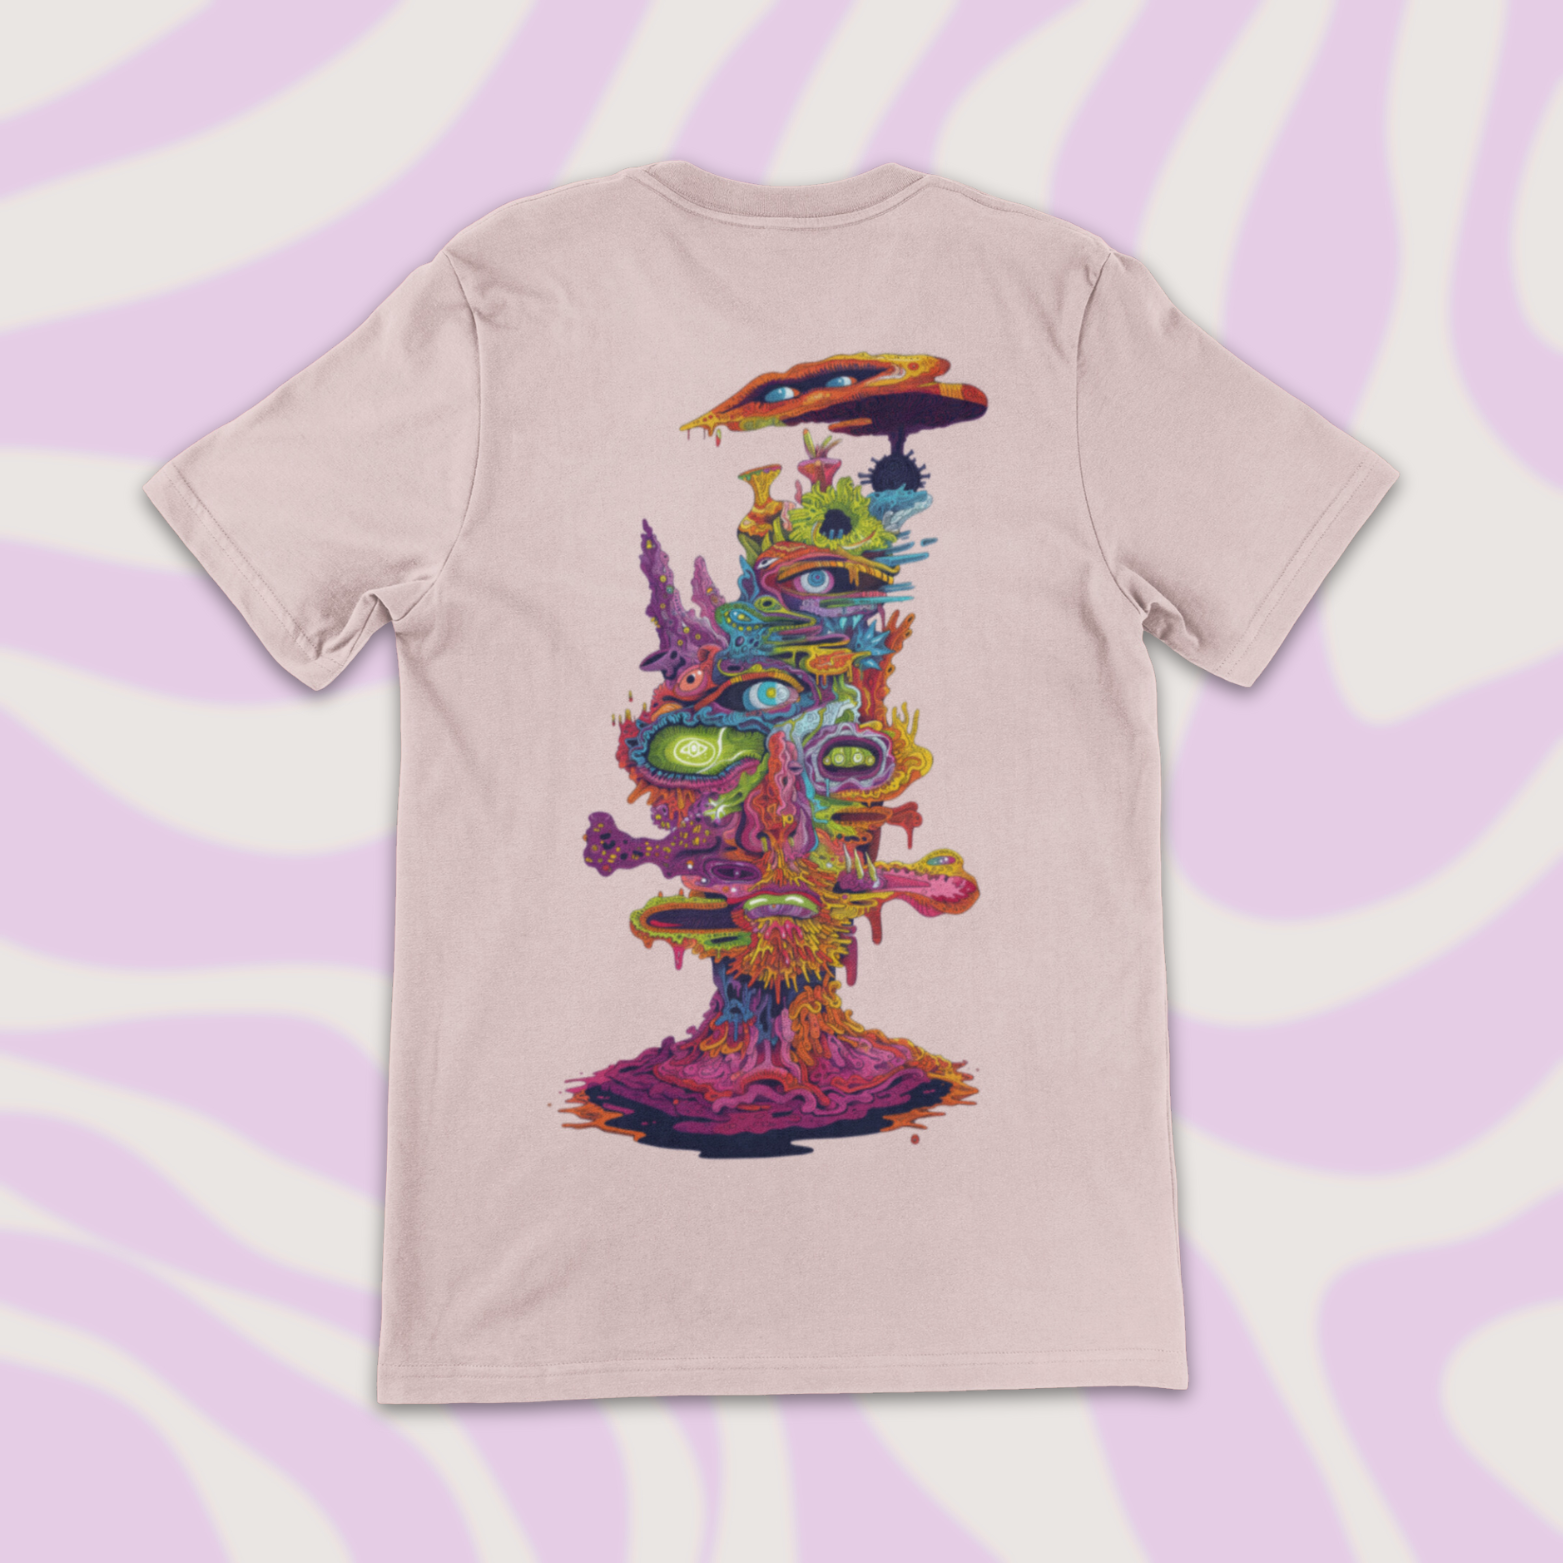 Psychedelic Graphic Tee, a Very Trippy Face